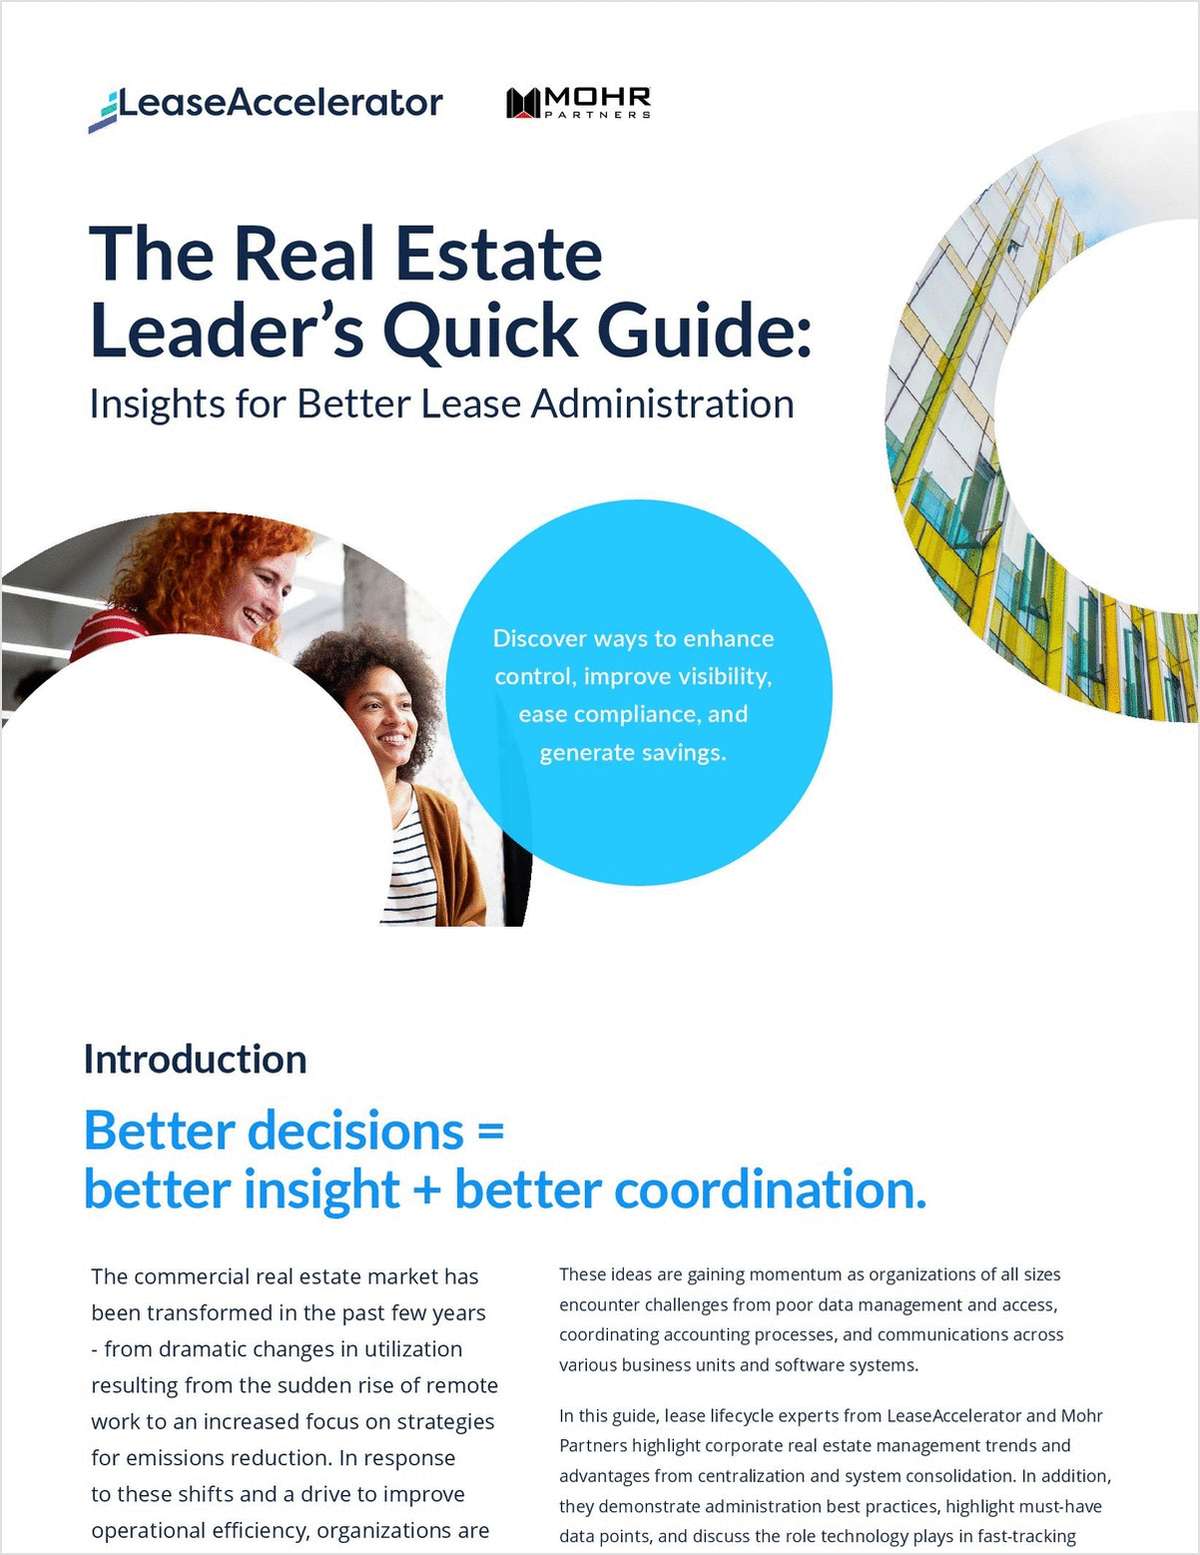 The Real Estate Leader's Quick Guide: Insights for Better Lease Administration link